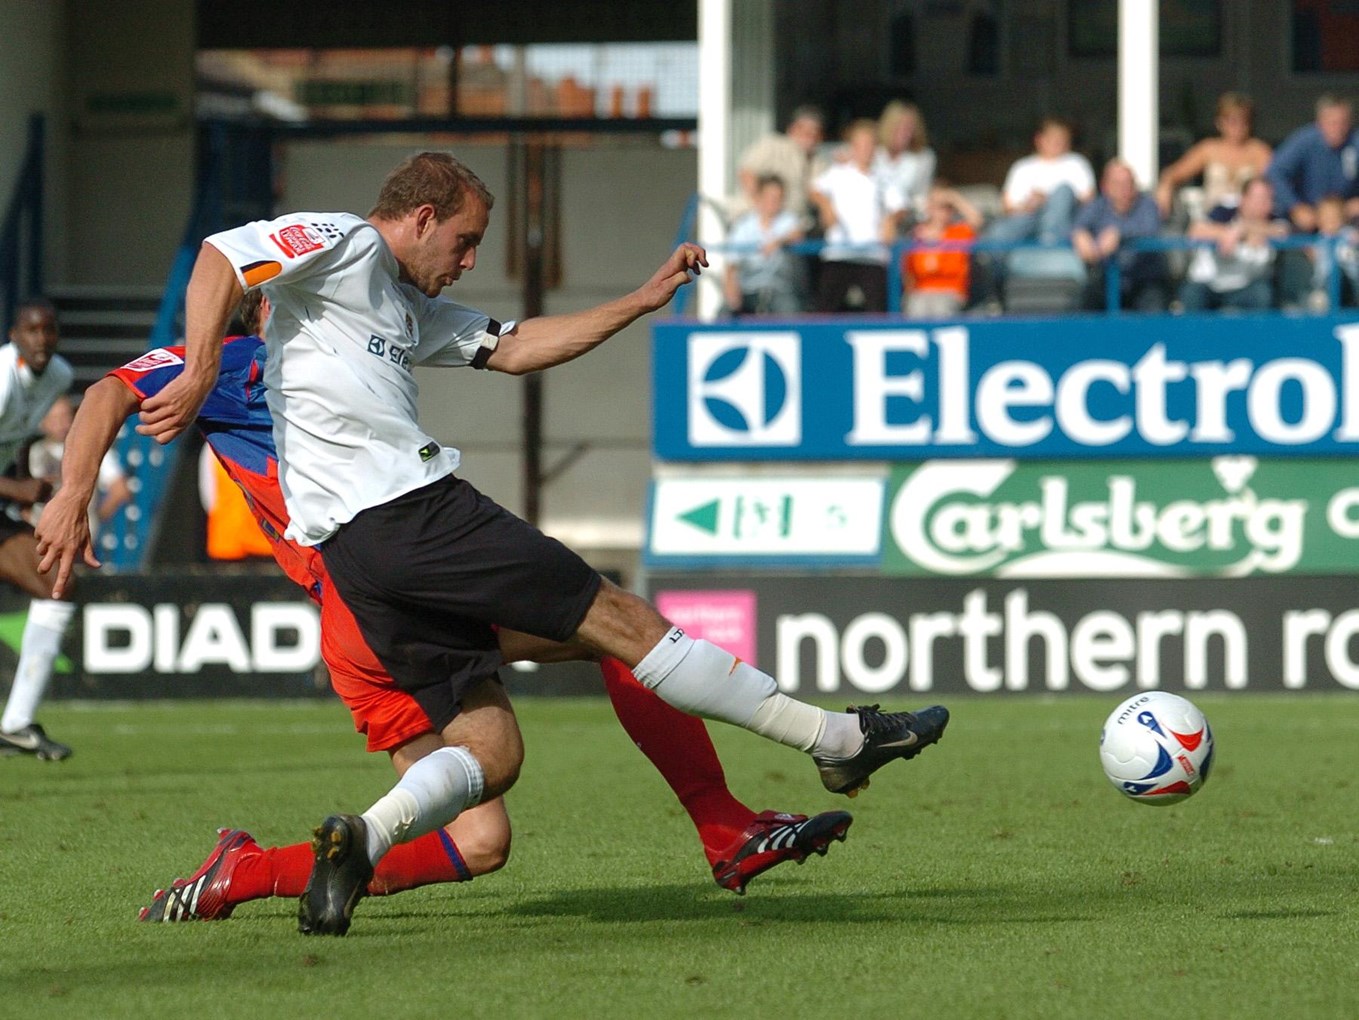 Rowan Vine netting Luton Town's second goal against Palace in 2006.